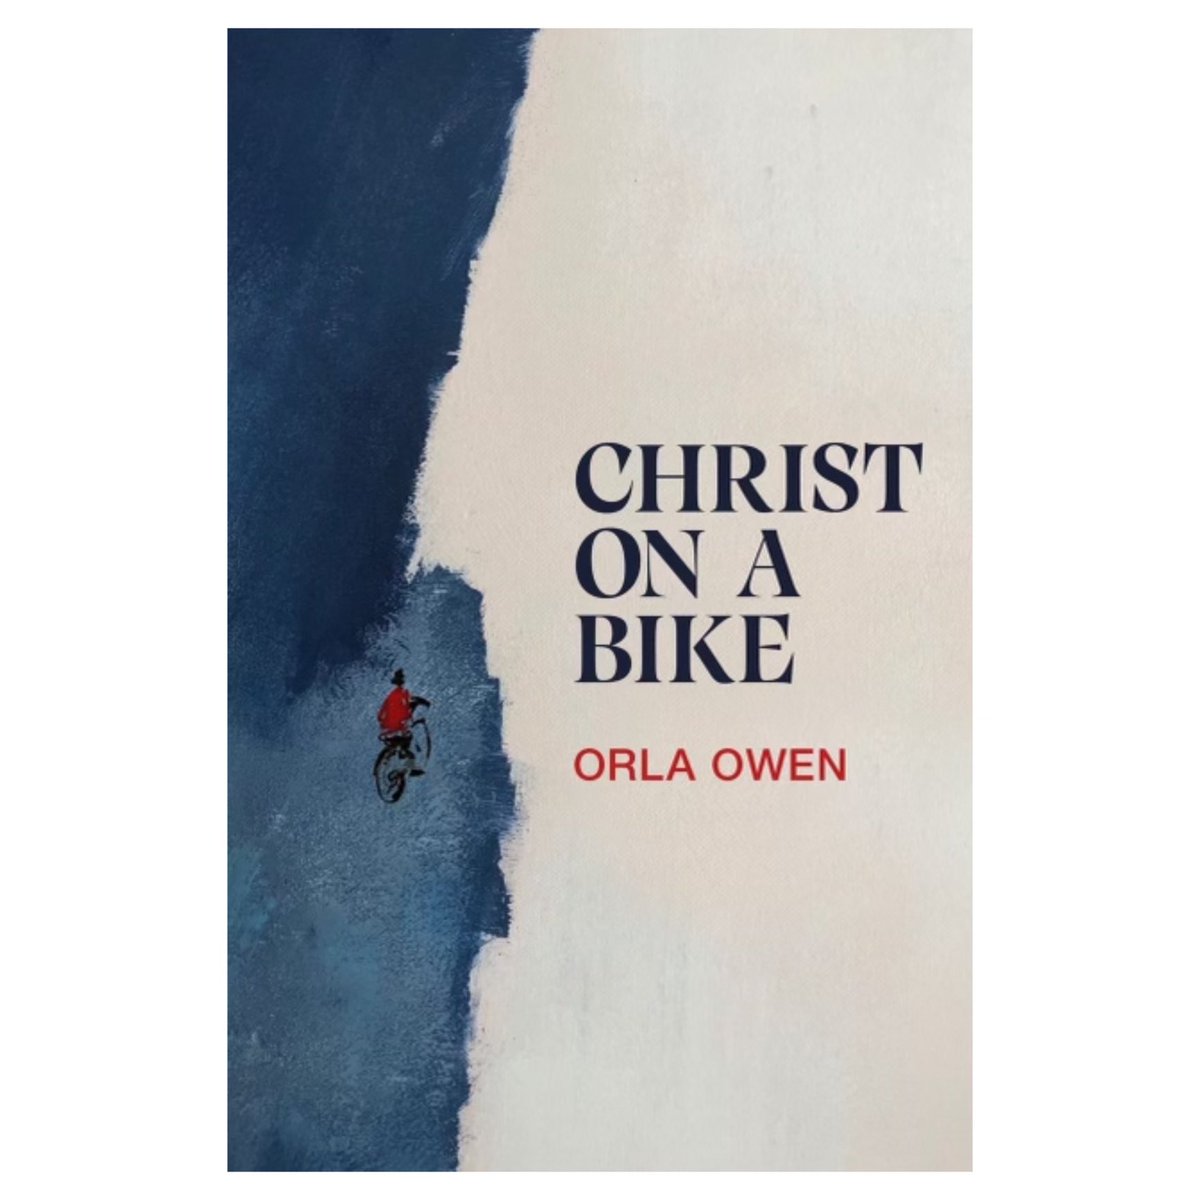 Hugely excited to say I’m going to be doing a book event in #Bristol in September. Details coming soon. So happy - love it there💙📚💙

#ChristOnABike #coab #books #booktwt #BookTwitter @Ofmooseandmen